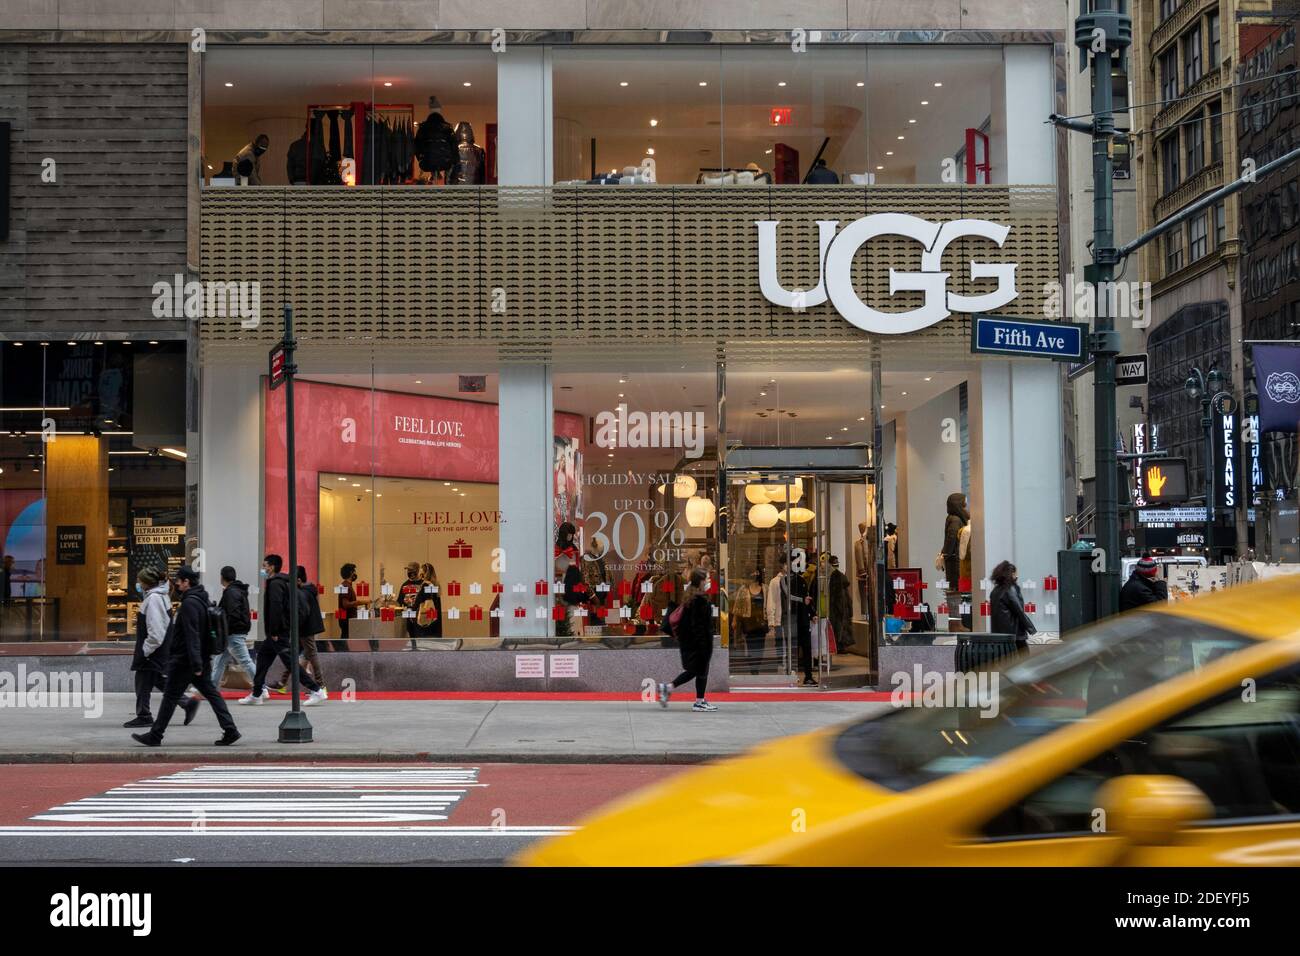 ugg shop nyc, amazing sale Save 69% available - www.veribox.com.tr